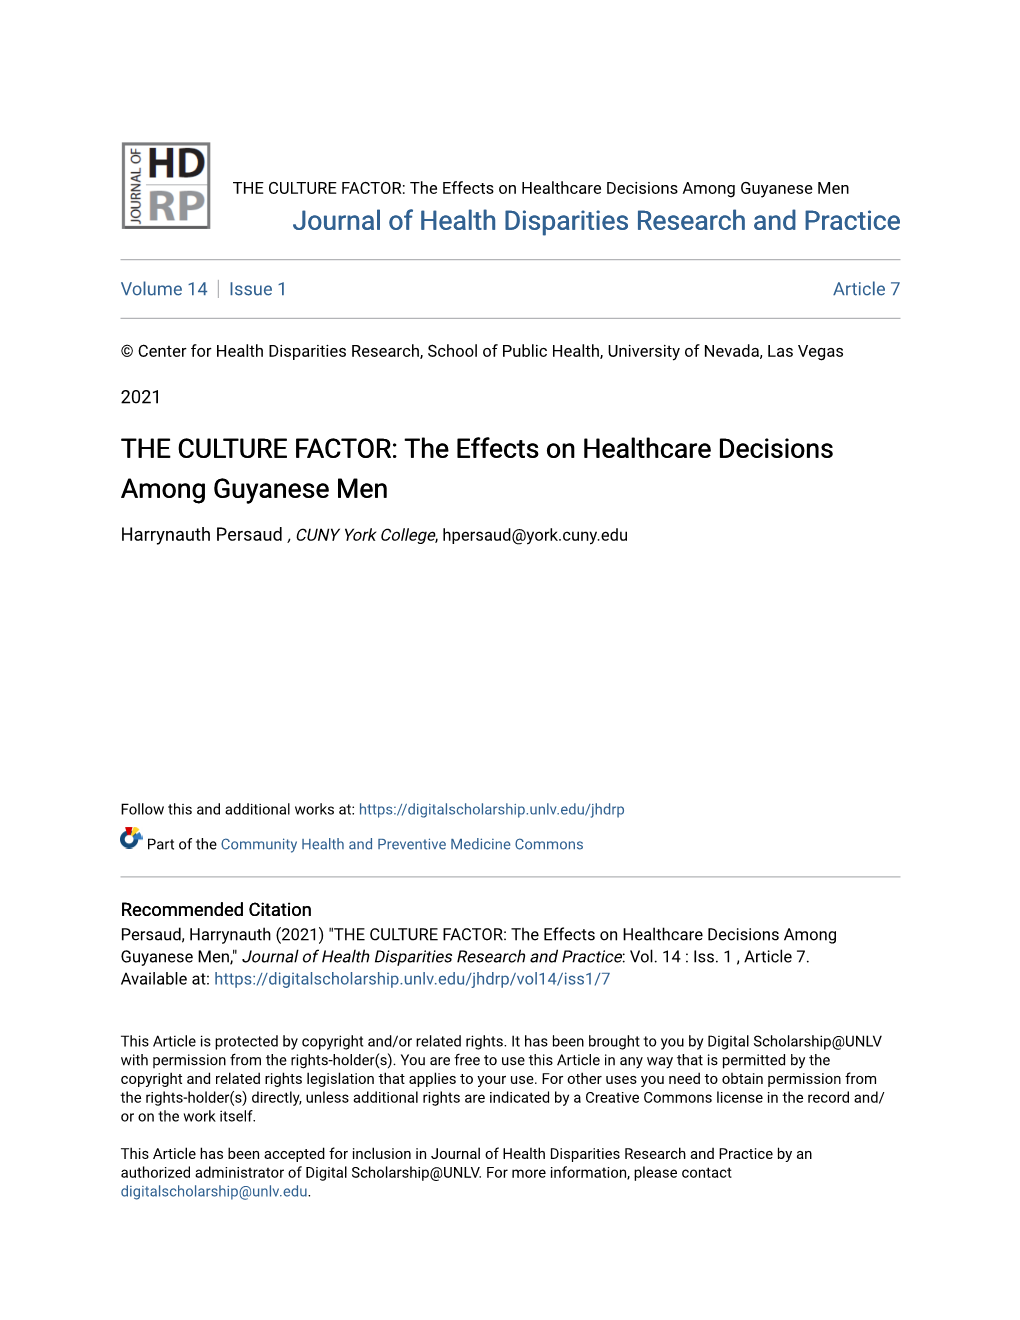 THE CULTURE FACTOR: the Effects on Healthcare Decisions Among Guyanese Men Journal of Health Disparities Research and Practice